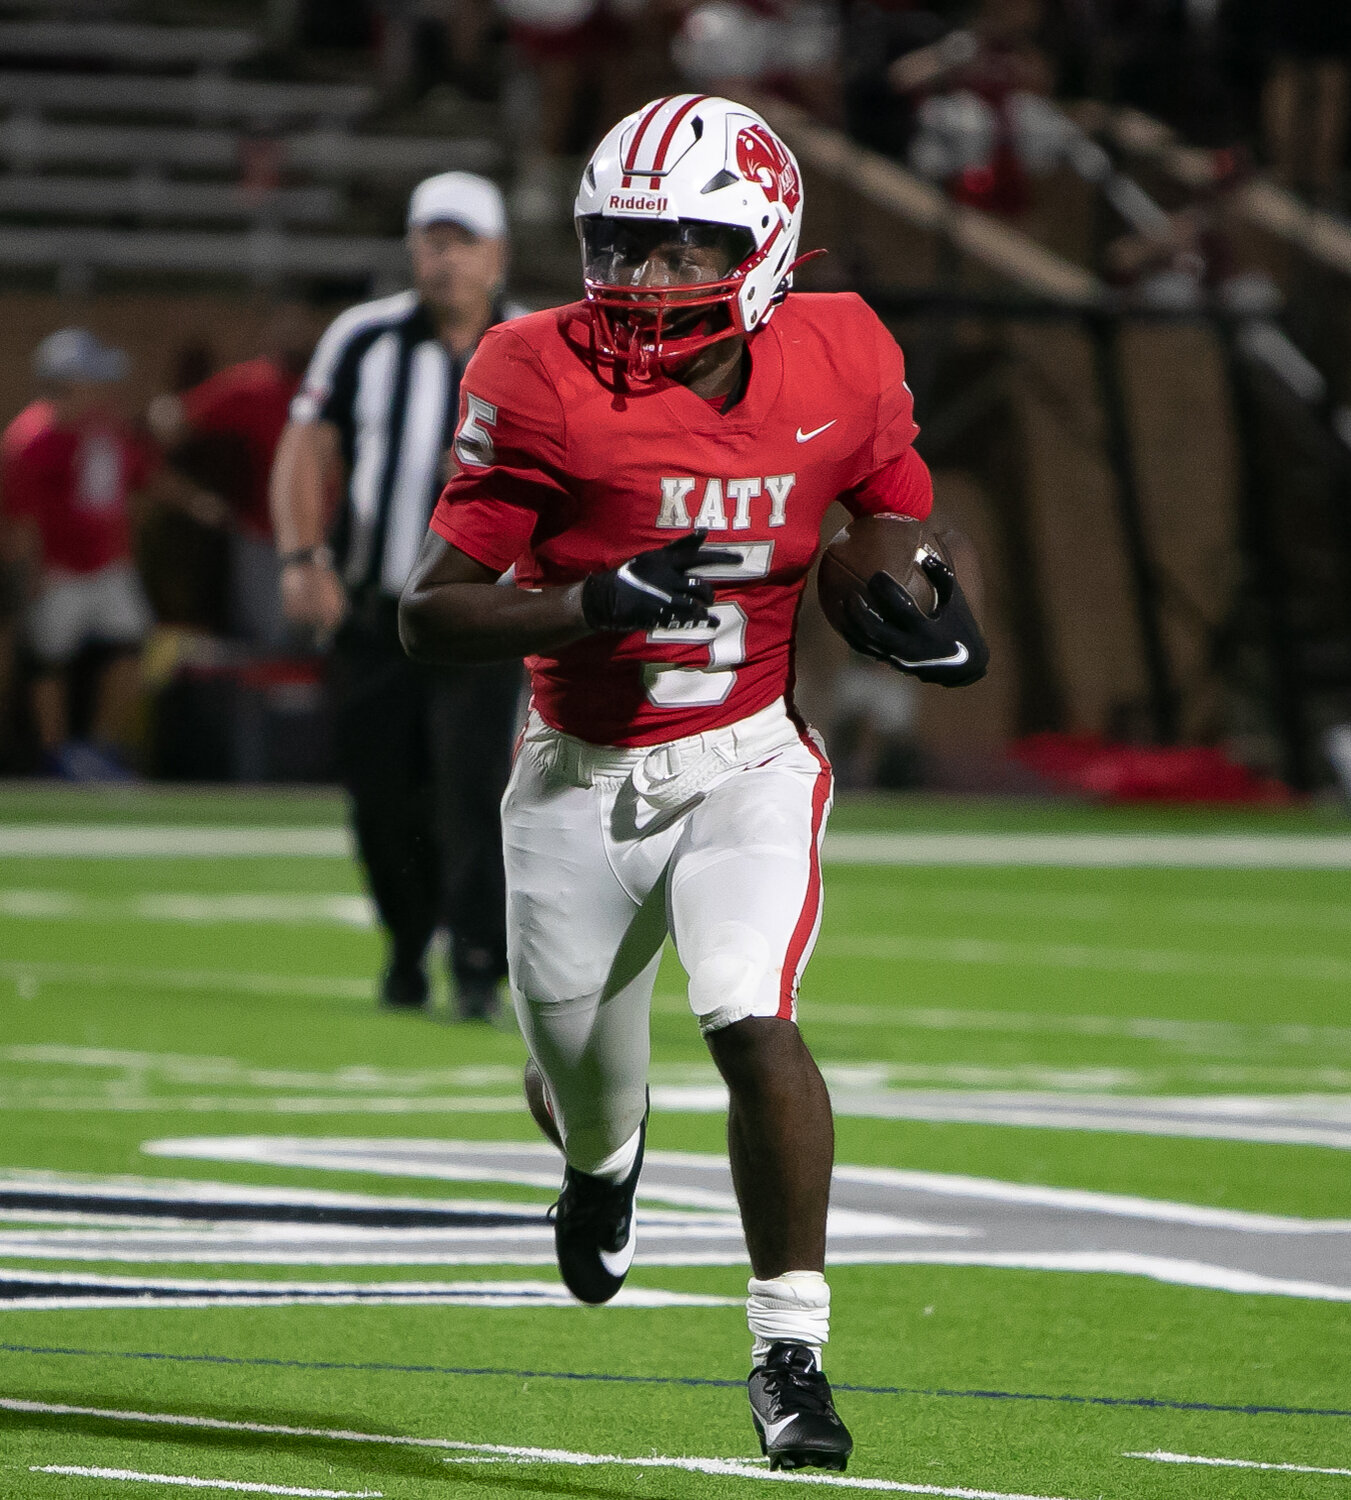 Romel Jordan runs downfield during a game between Katy and Clear Springs at Rhodes Stadium.